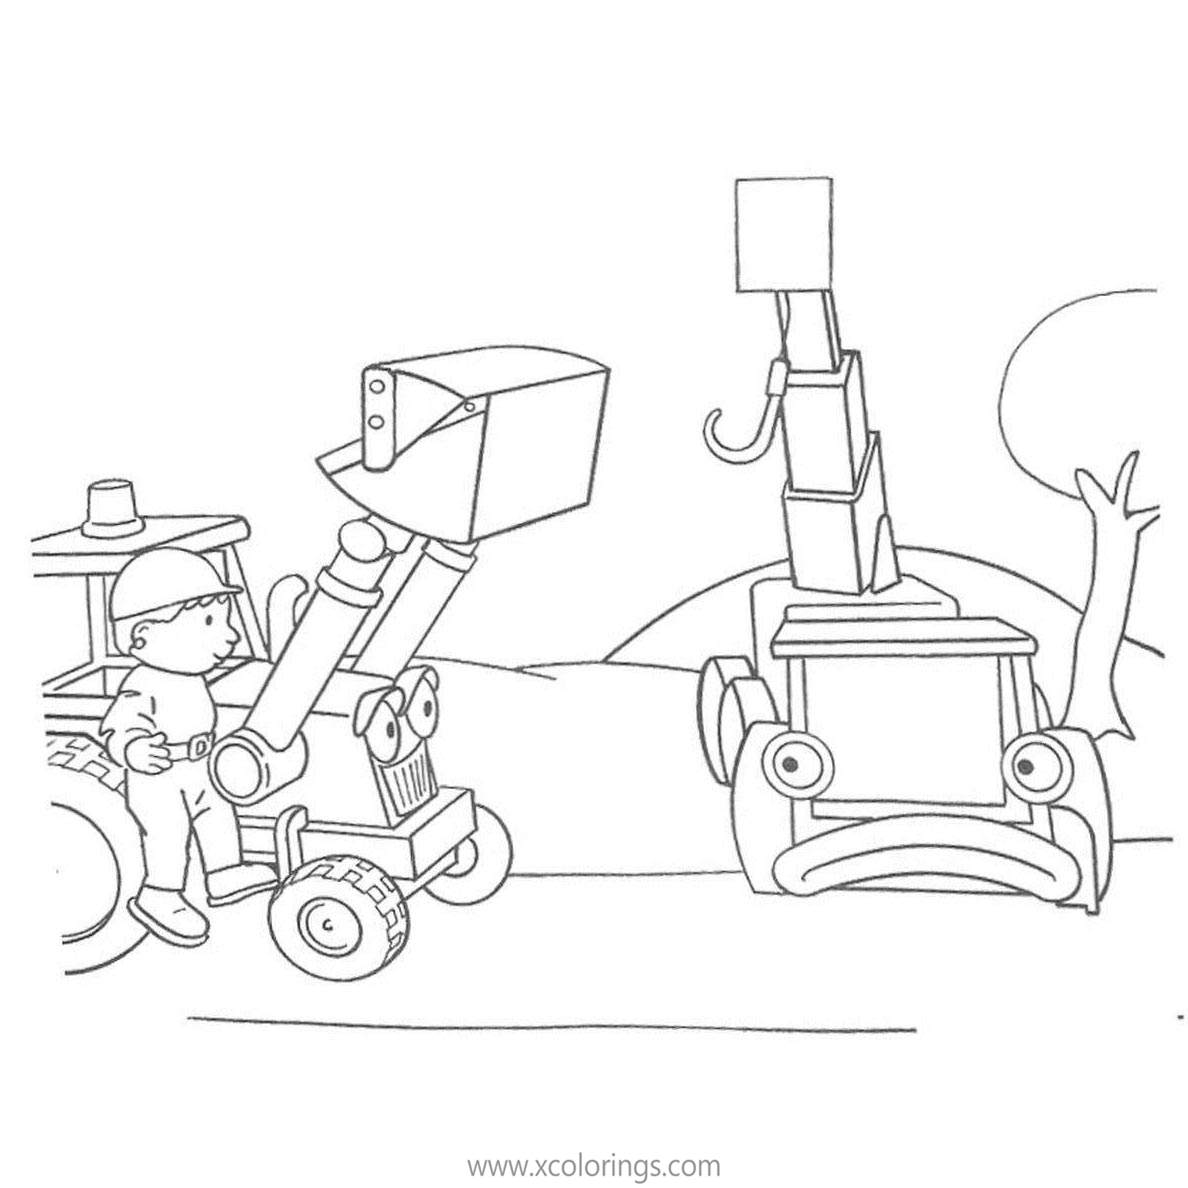 Free Bob the Builder Coloring Pages Lofty Needs Help printable